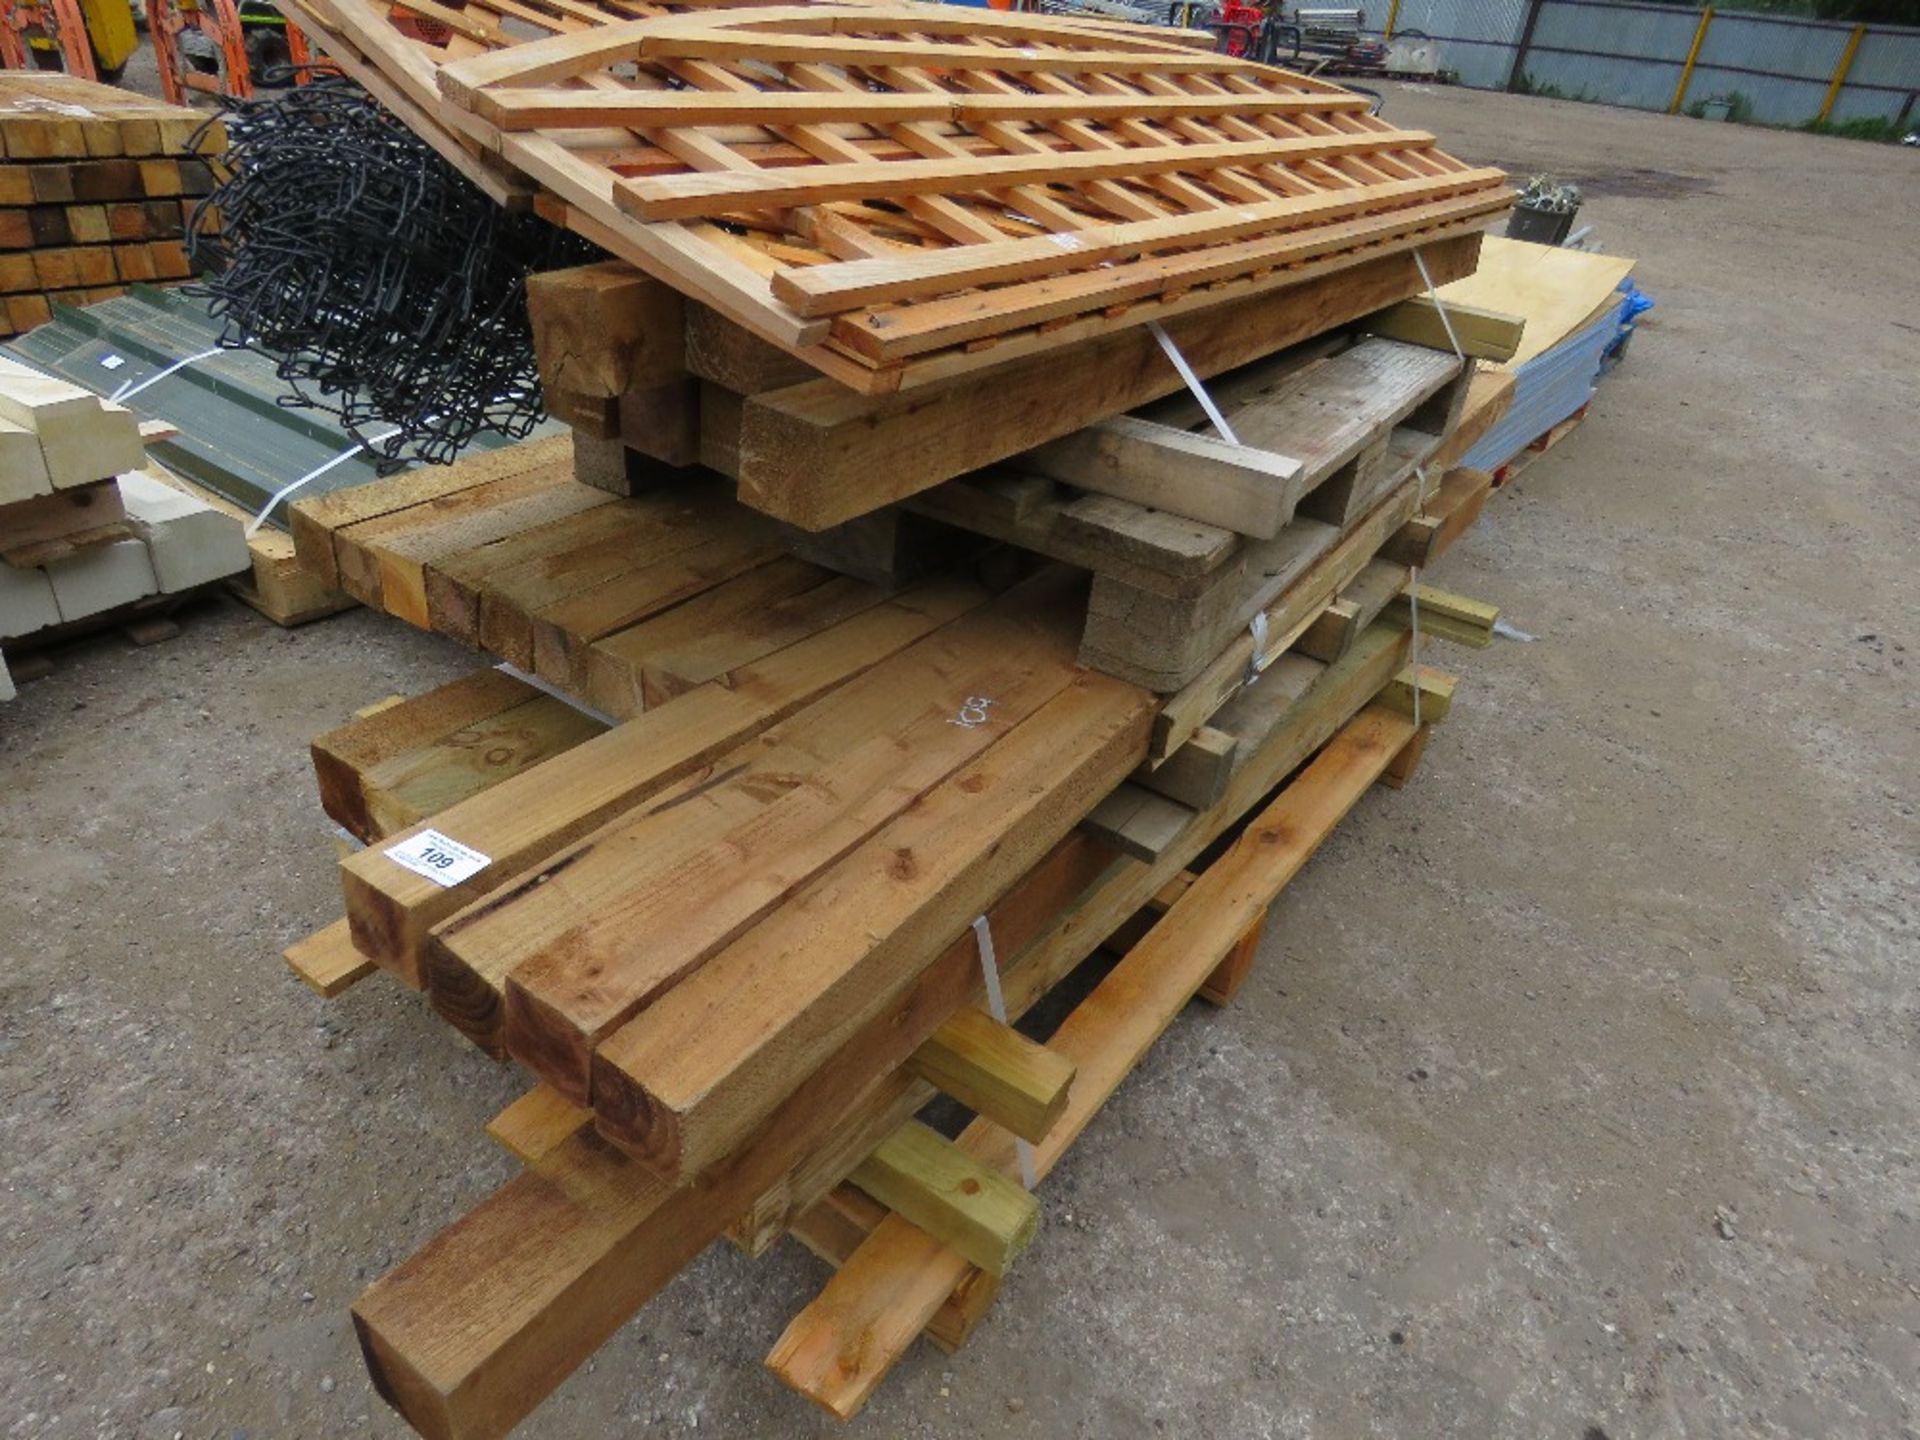 3 X PALLETS OF WOODEN POSTS, FENCE WIRE, TRELLIS ETC. - Image 3 of 4